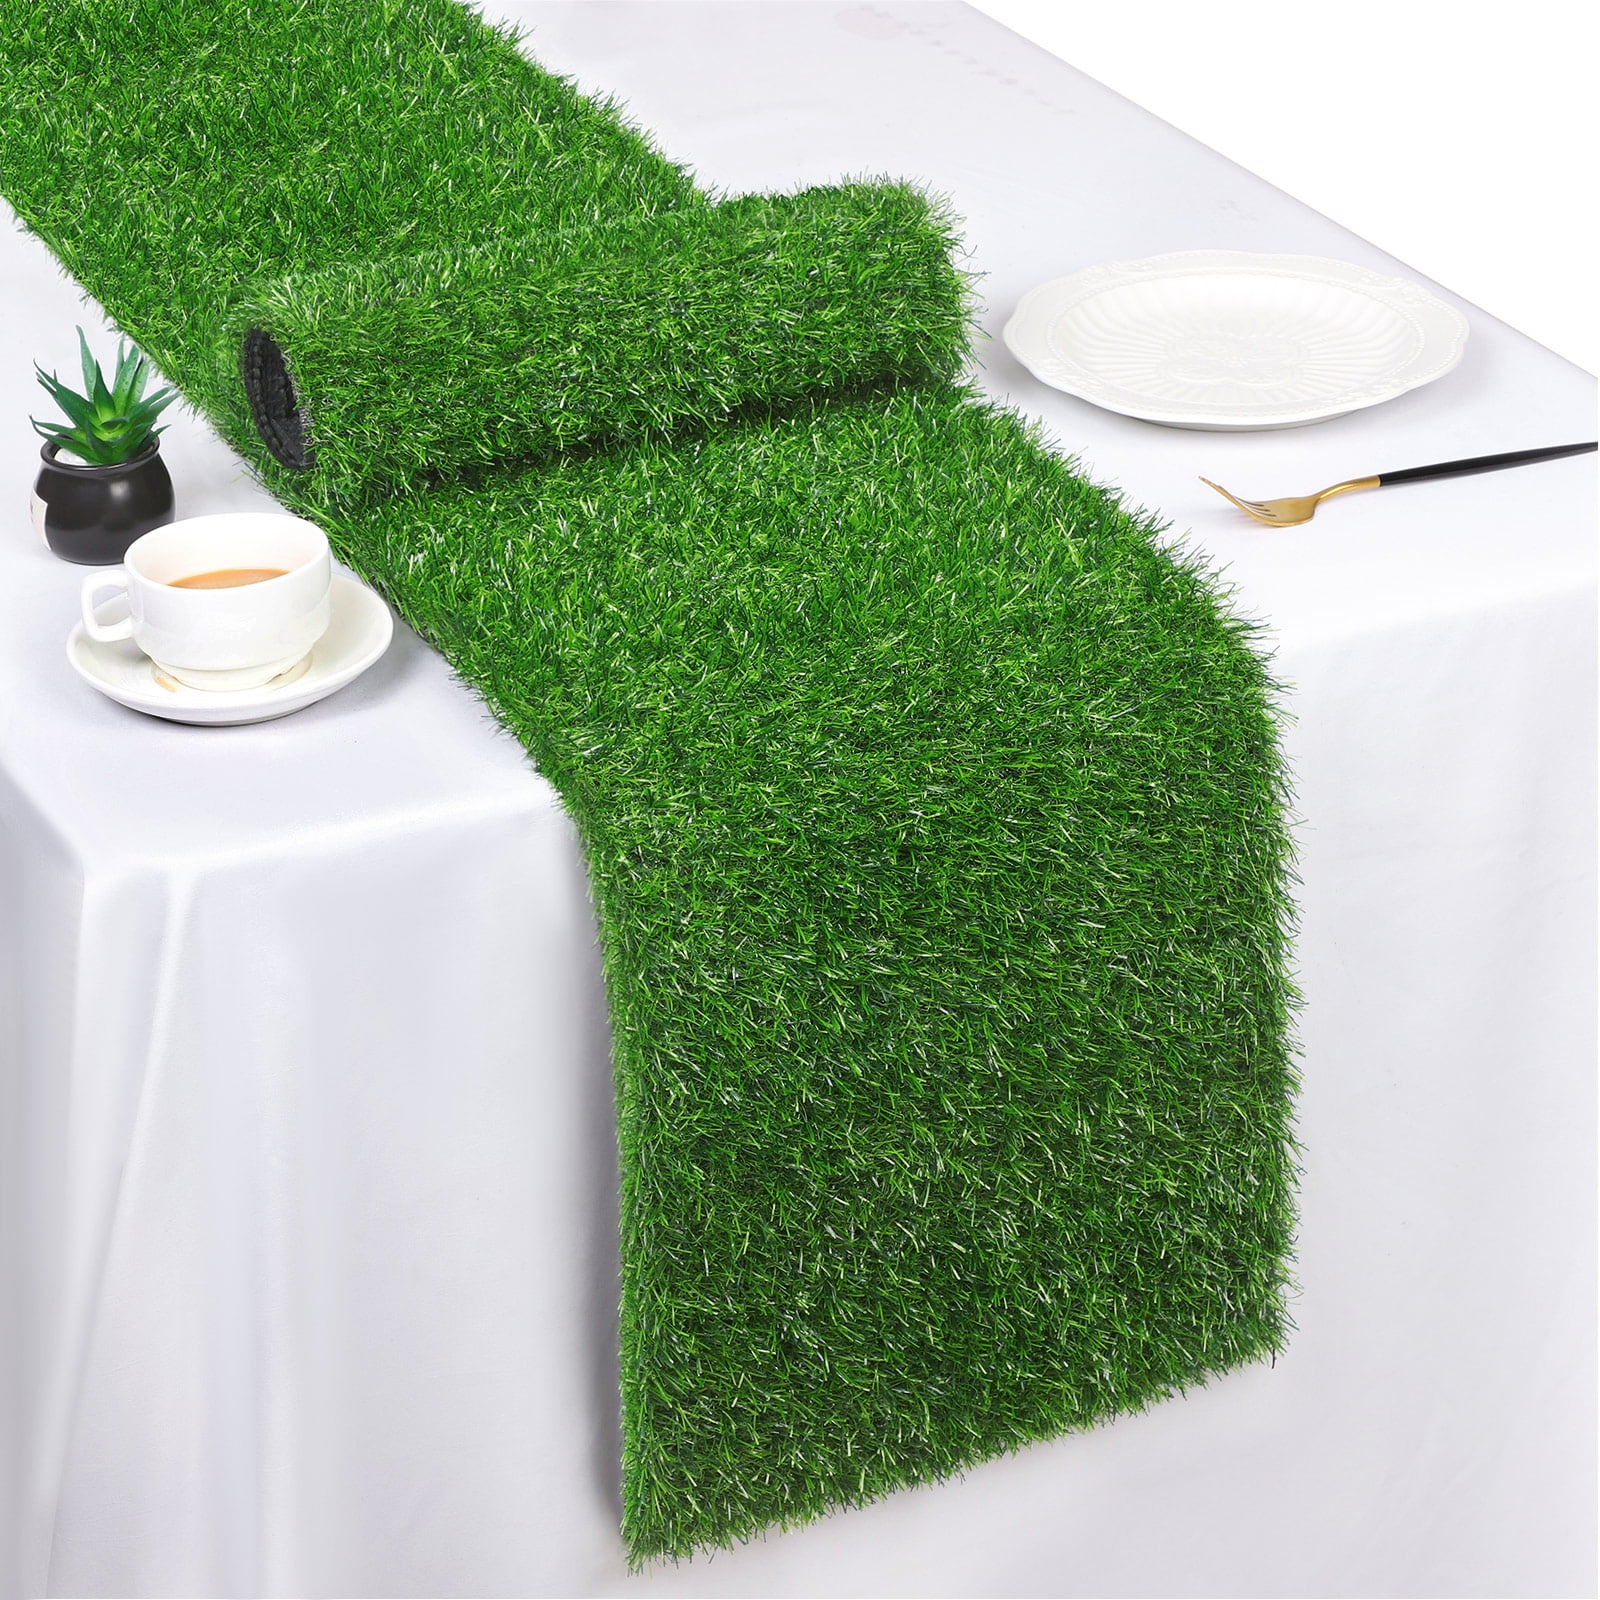 Artificial Grass Table Runner Table Cover Tabletop Decor For